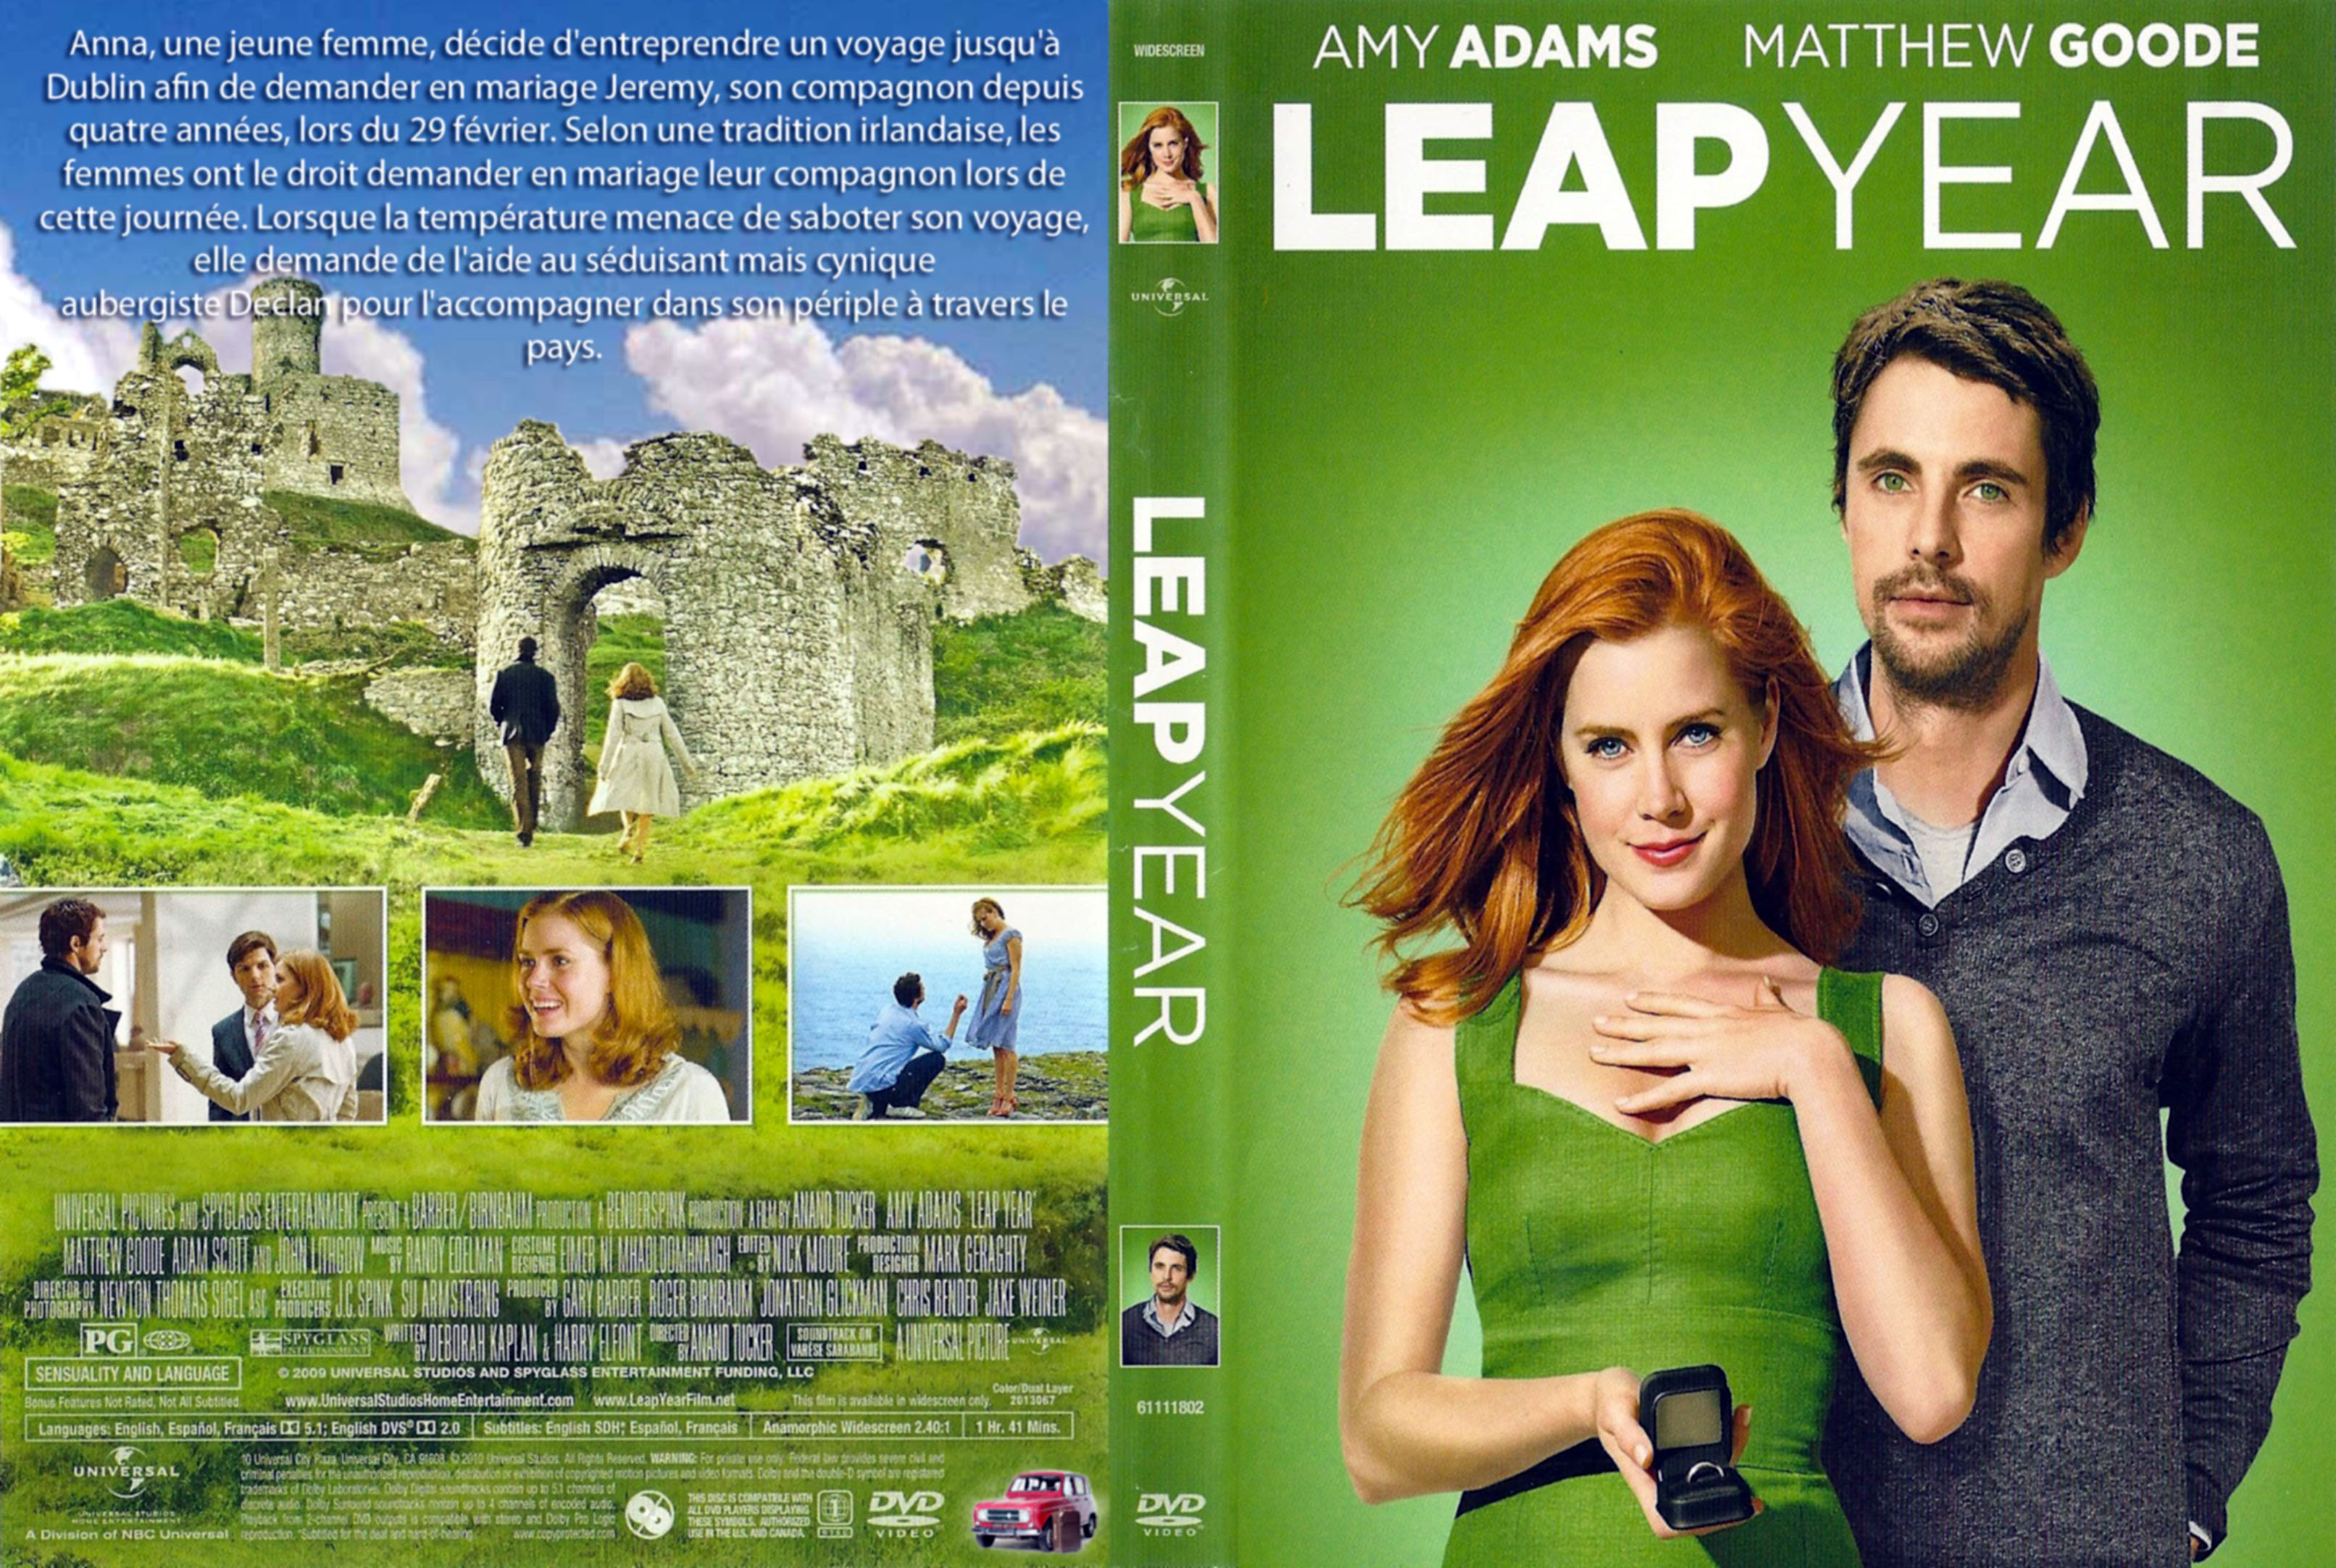 Jaquette DVD Leap year (Canadienne)